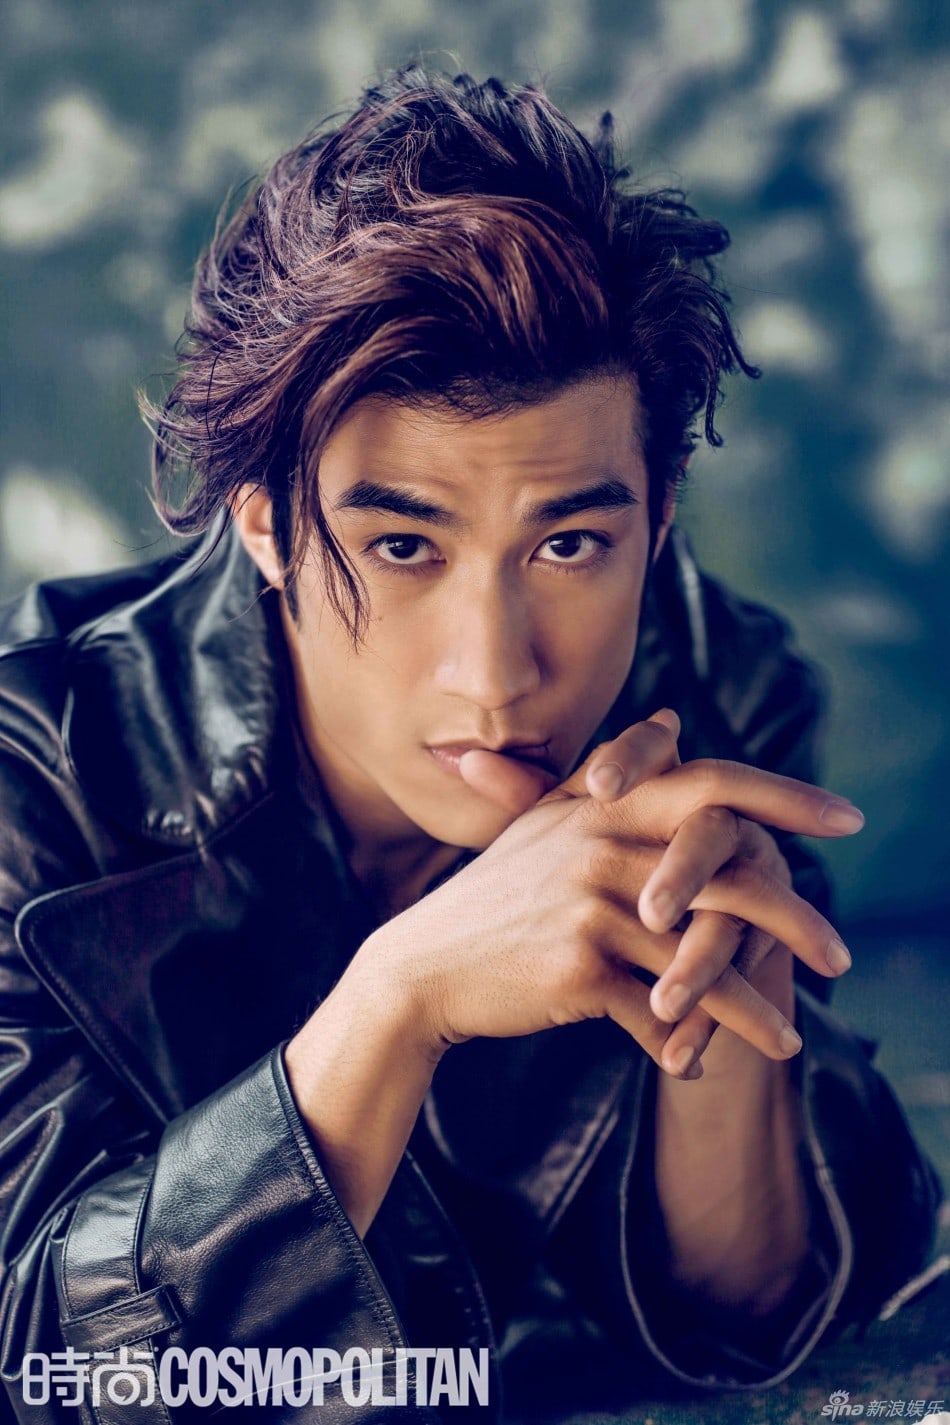 Aarif Rahman also known as Aarif Lee is an actor and Cantopop singer from  Hong Kong  Chinese man Gentleman style Singer